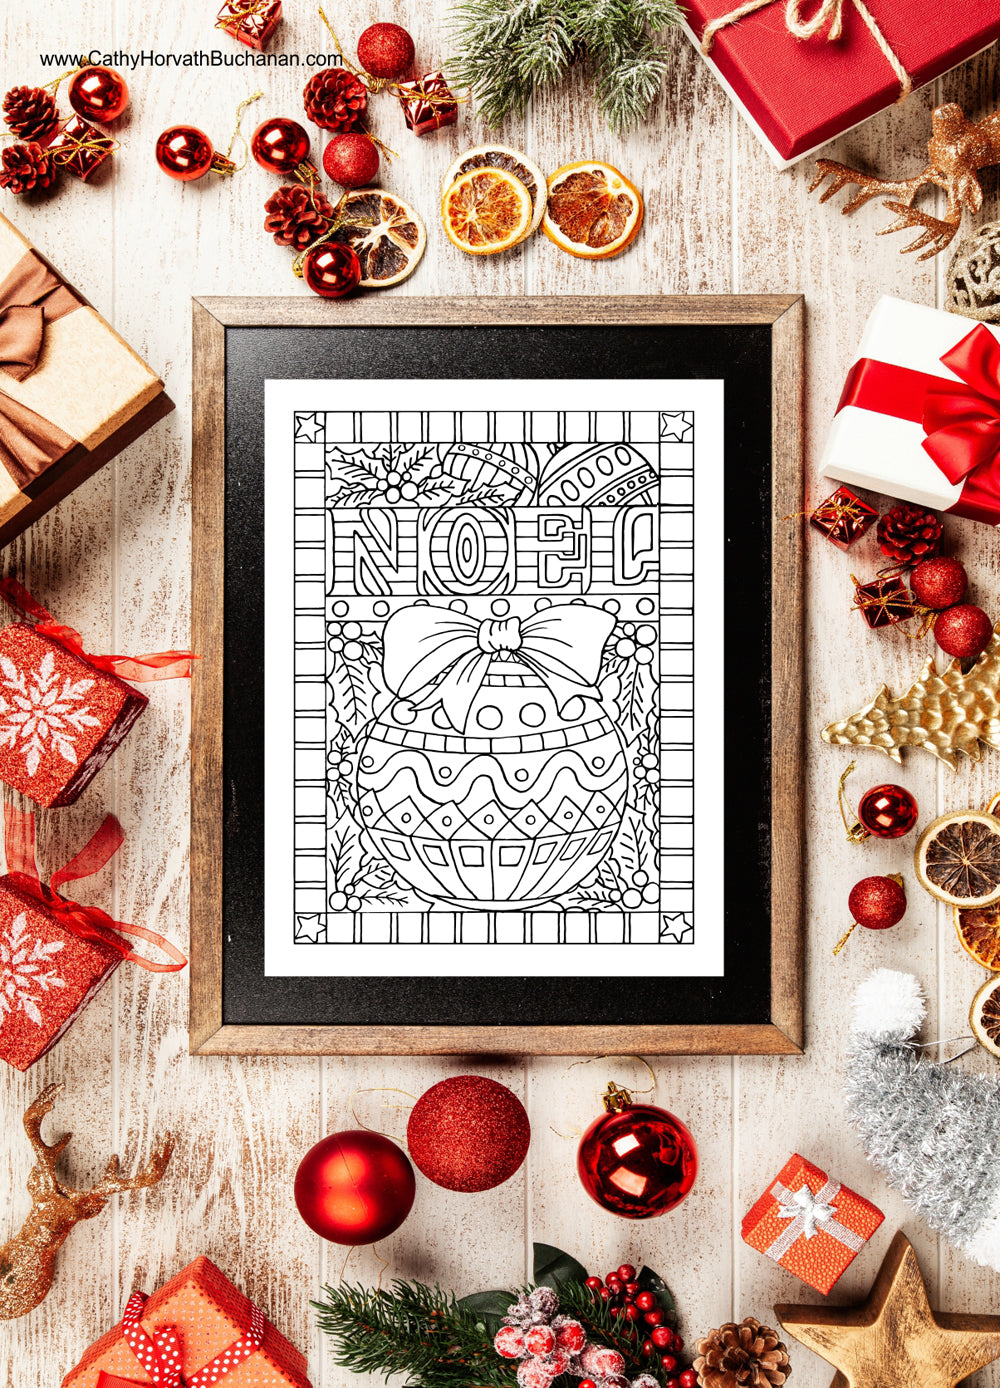 Noel Christmas Ornament Coloring Page Design, PDF Download Printable by Cathy Horvath Buchanan